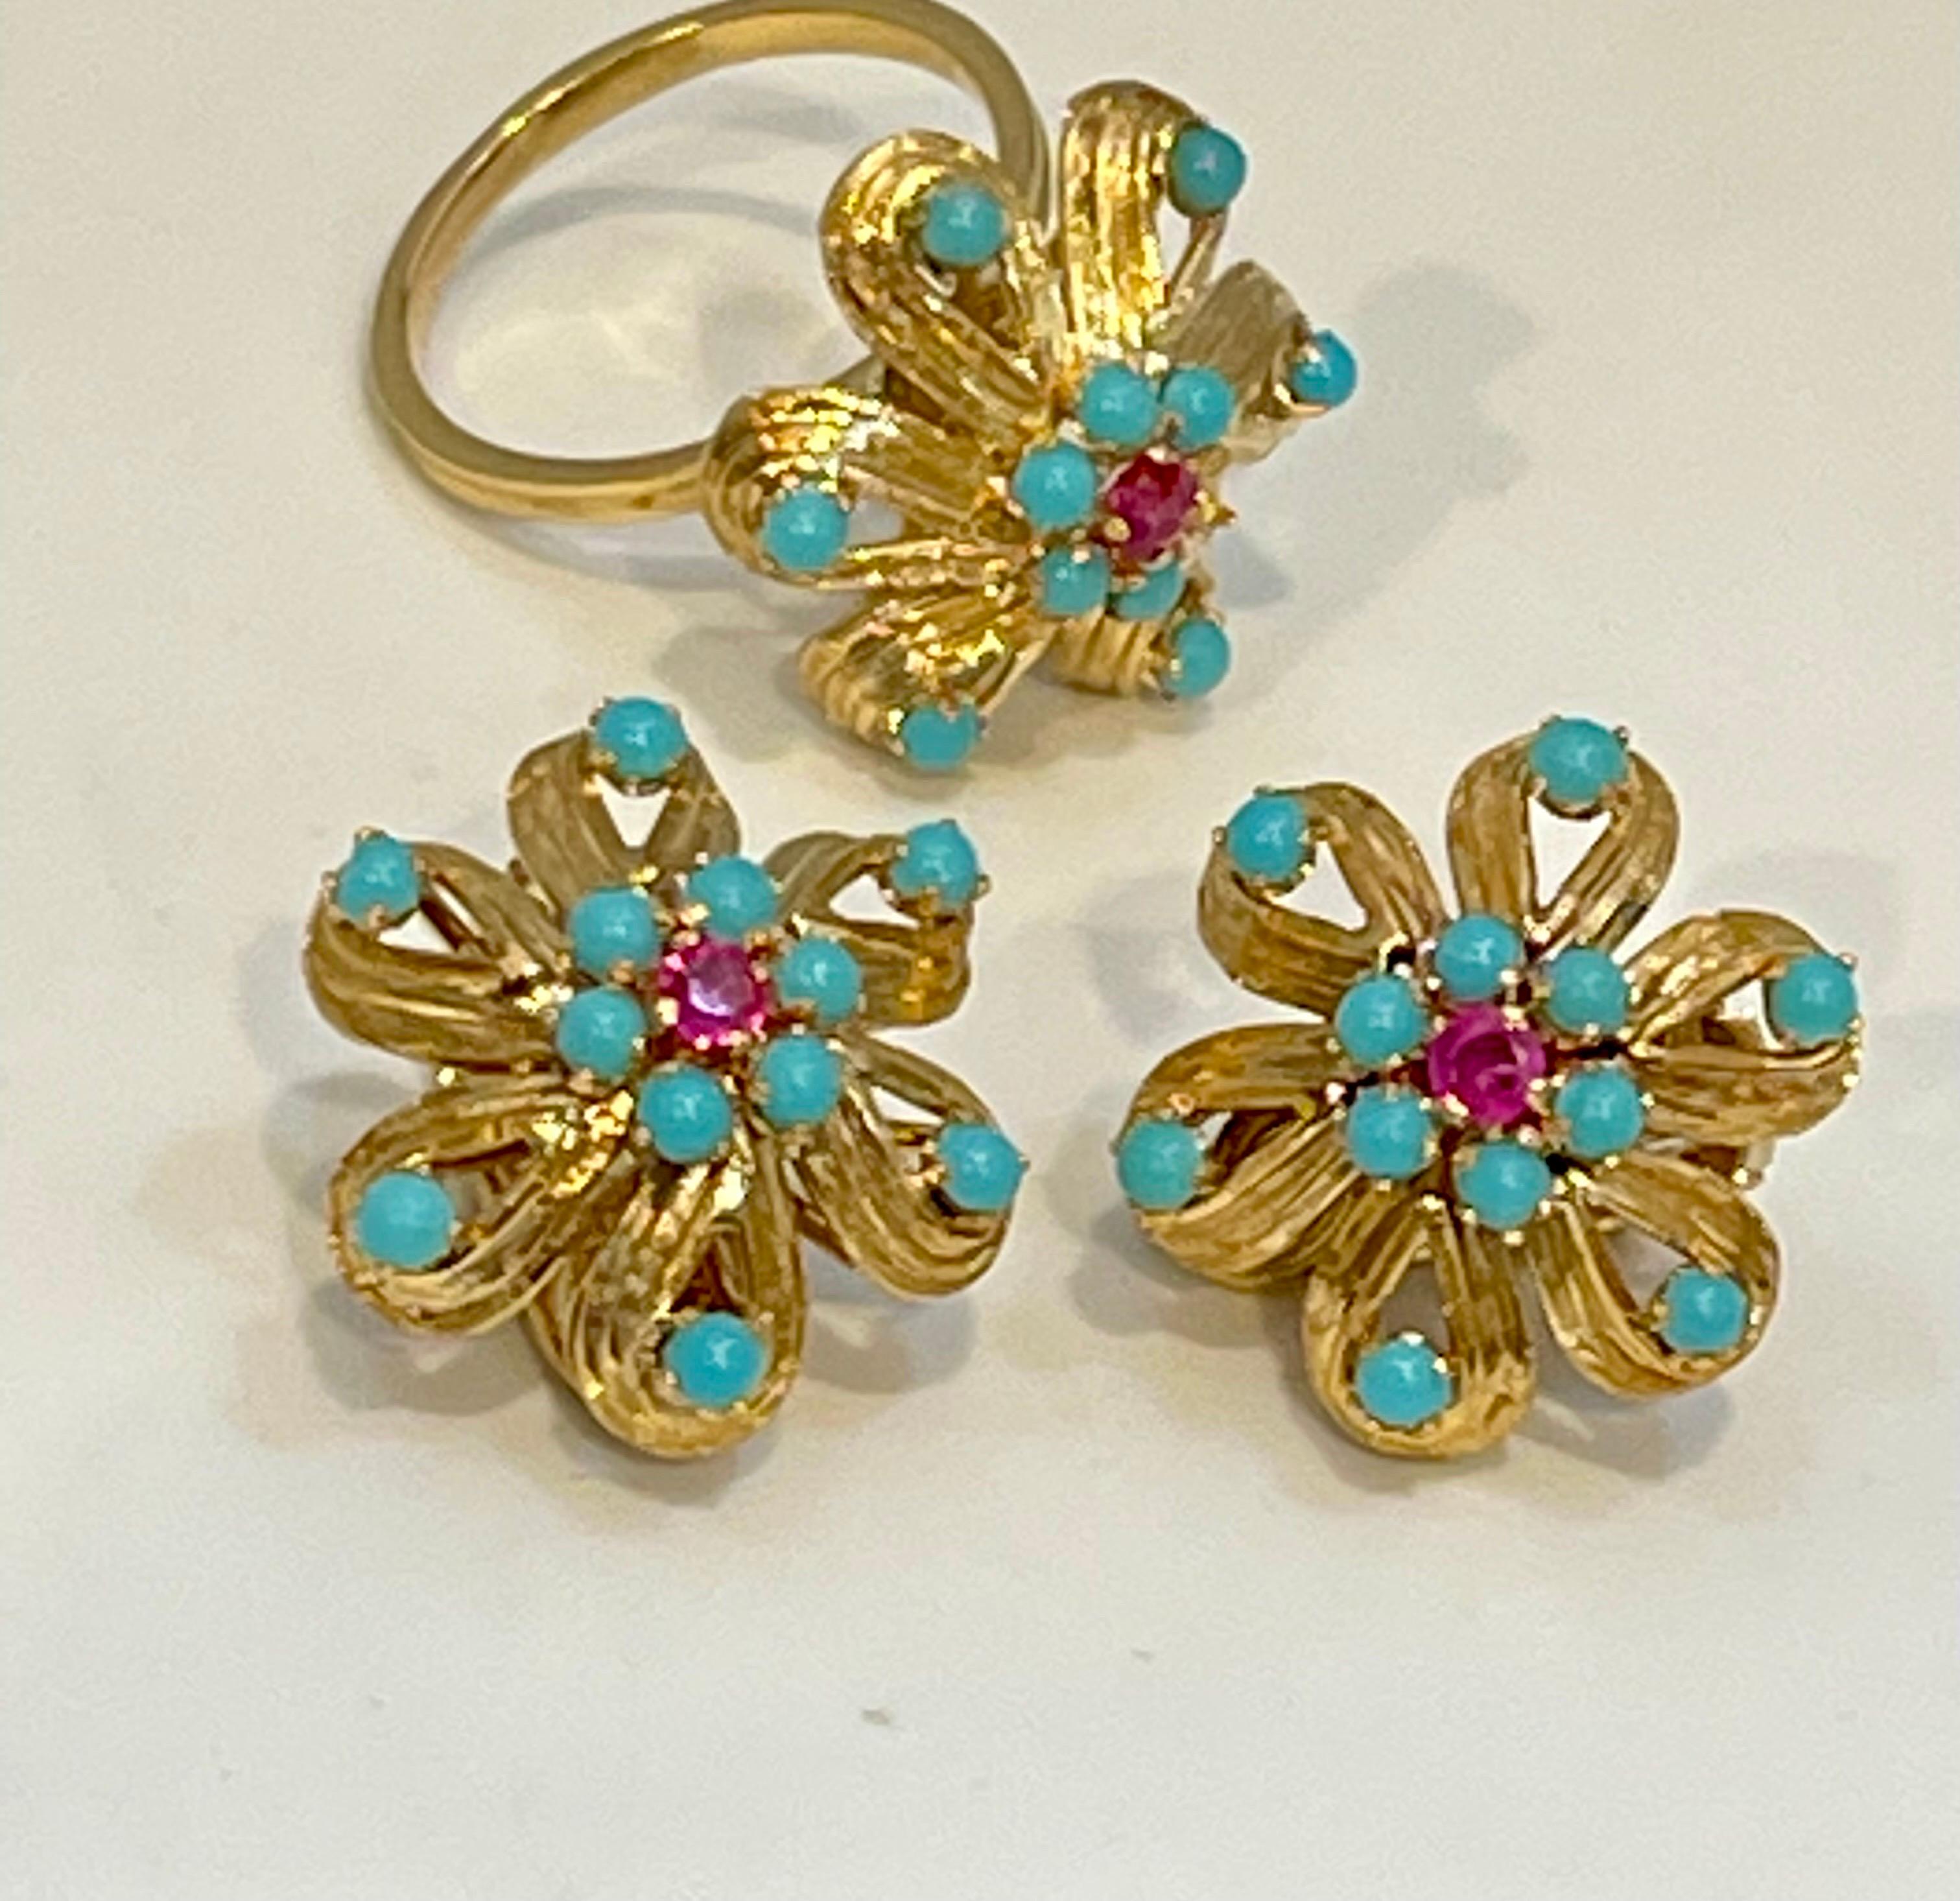 4 Ct Natural Turquoise & Ruby 18 Kt Yellow Gold Flower Ring & Earring Set 20Gm For Sale 1